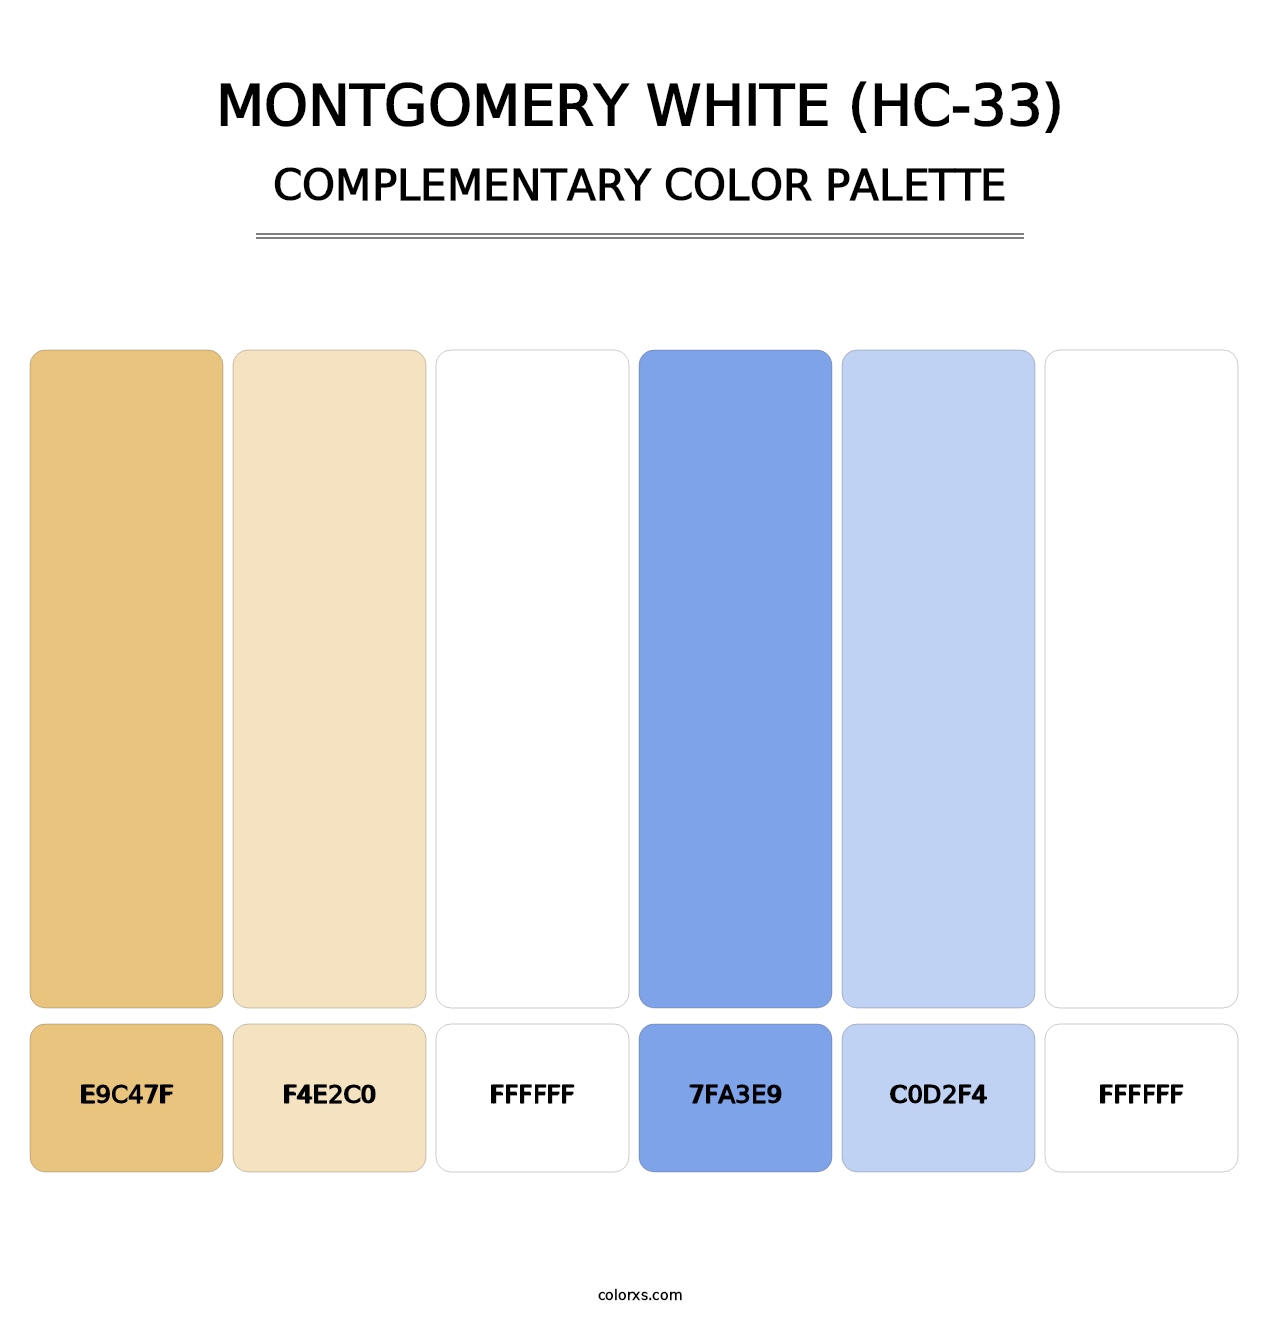 Montgomery White (HC-33) - Complementary Color Palette